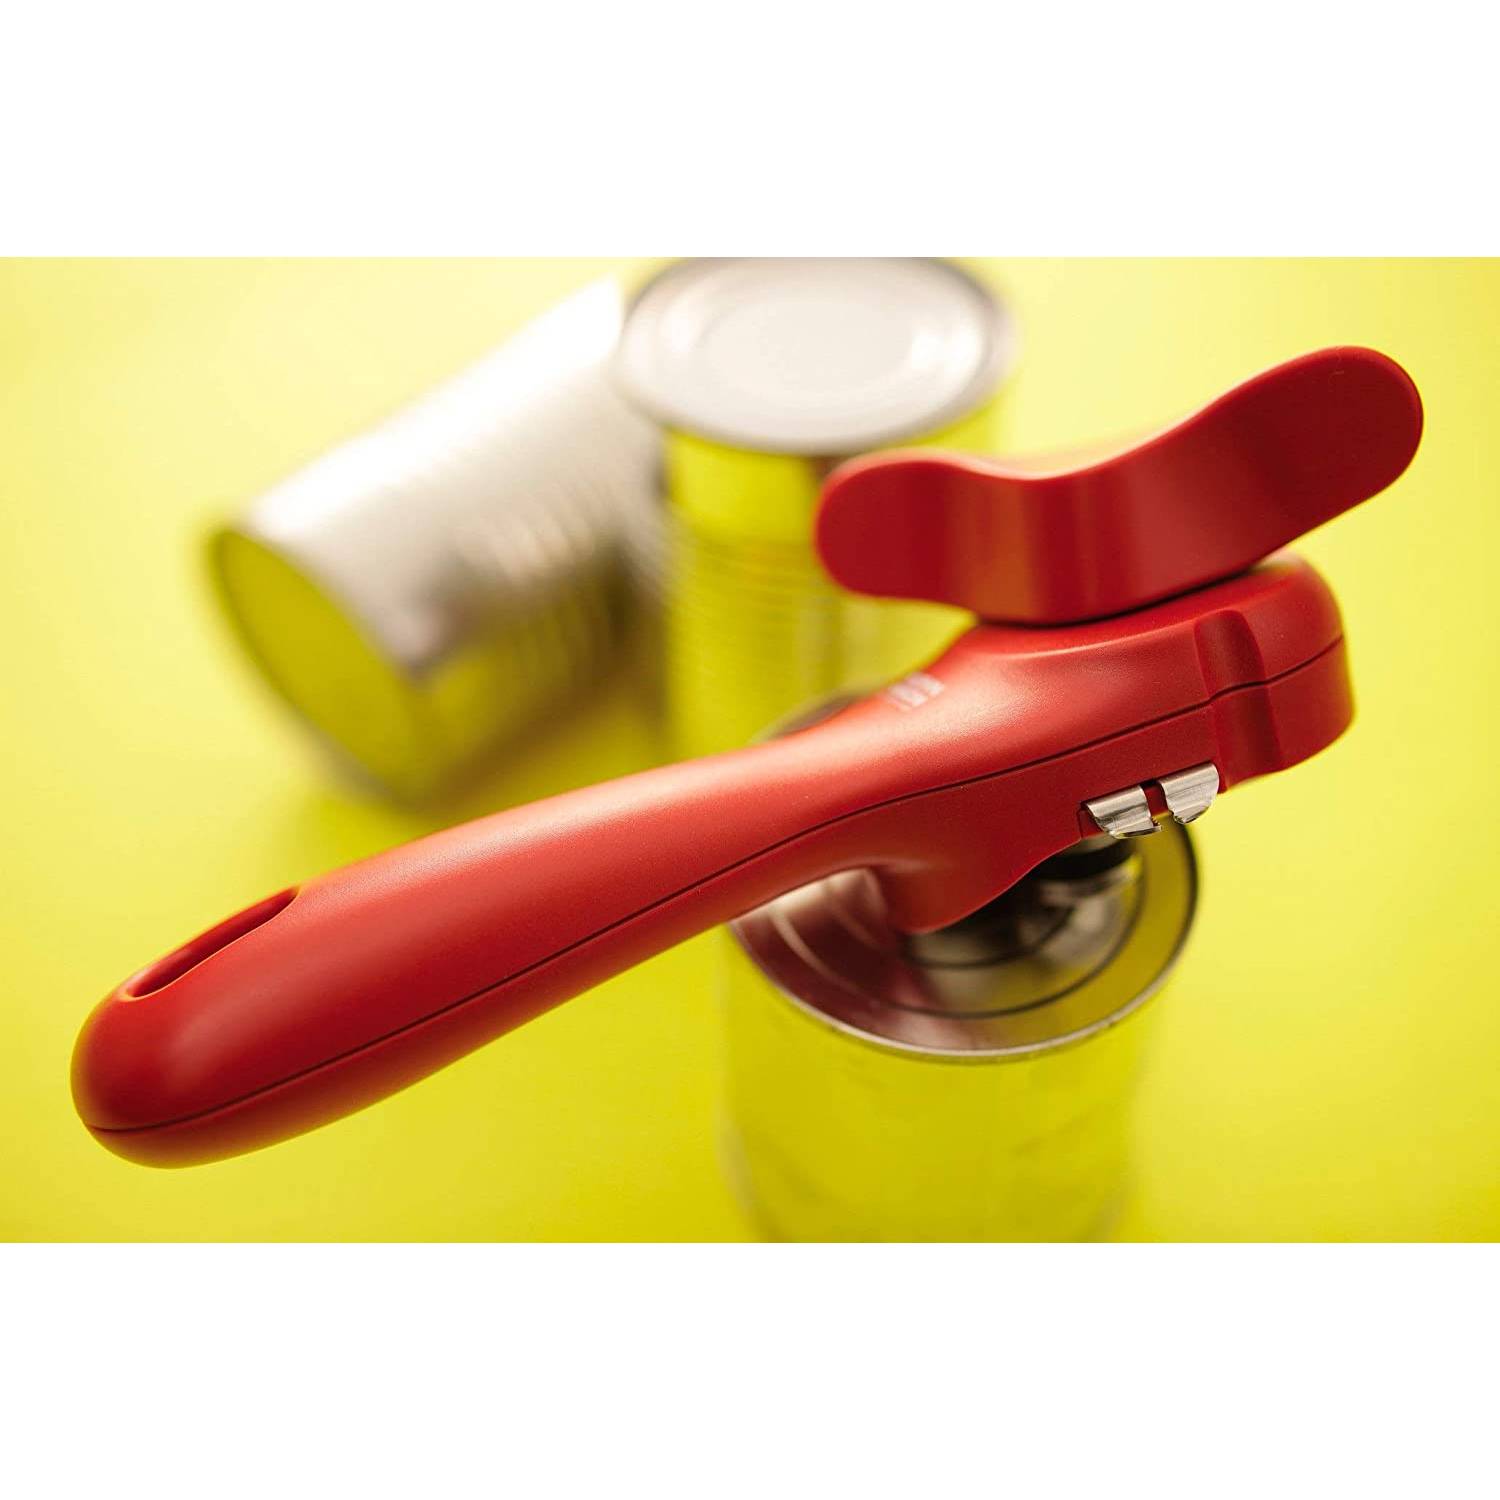 Kuhn Rikon Auto Ergo Safety Lid Lifter Yellow Can Opener Review on Vimeo